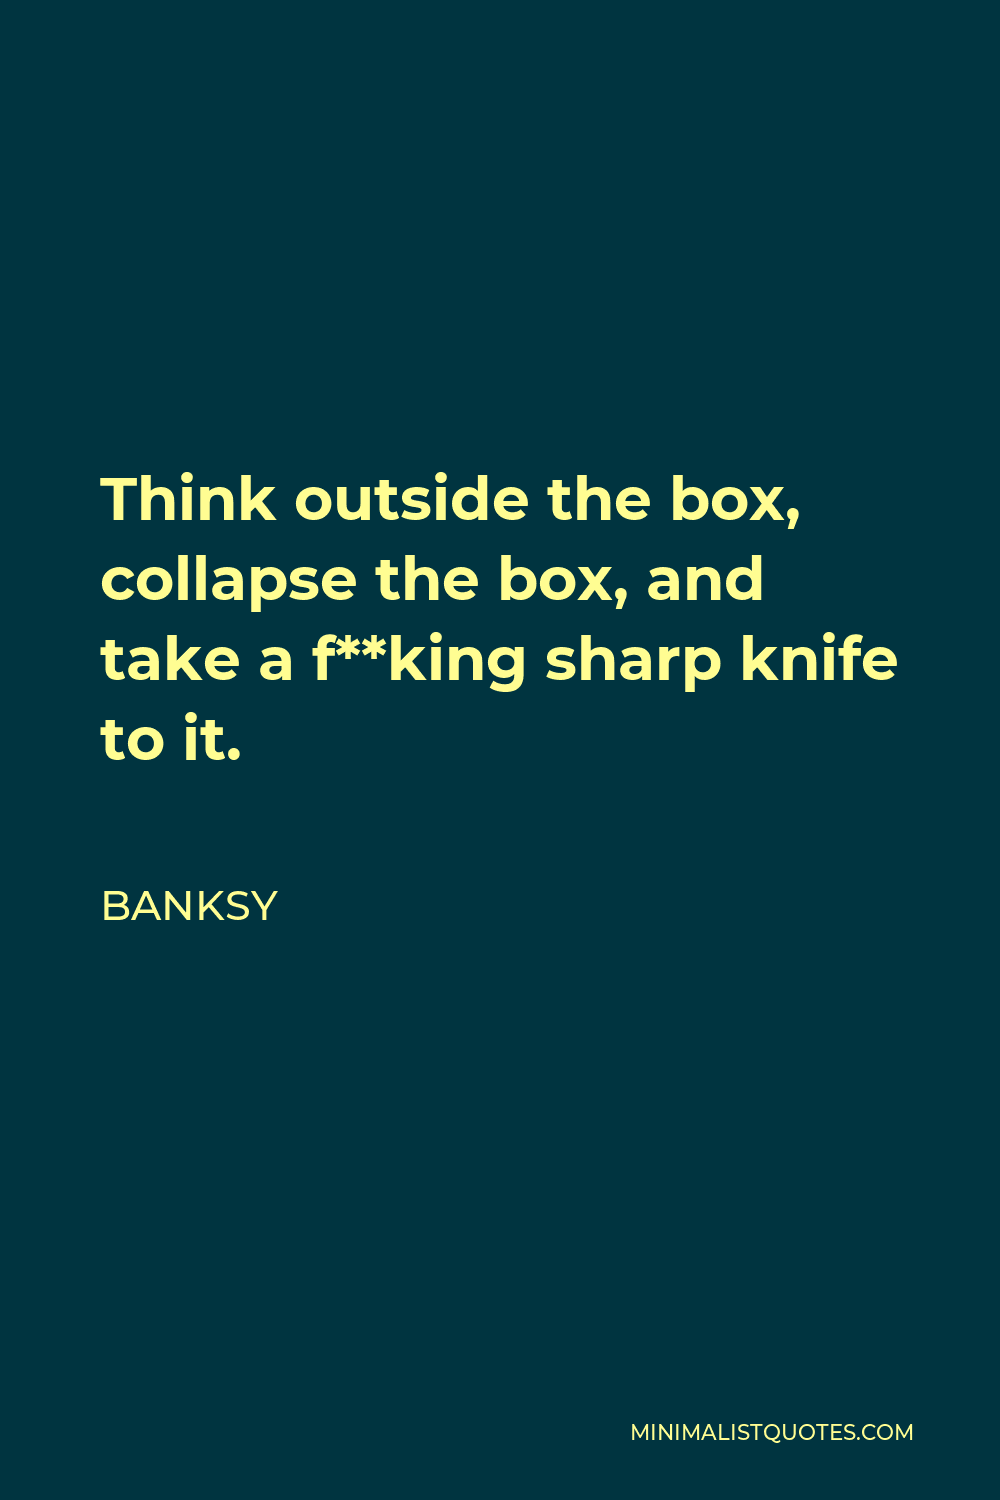 Banksy Quote - Think outside the box, collapse the box, and take a f**king sharp knife to it.